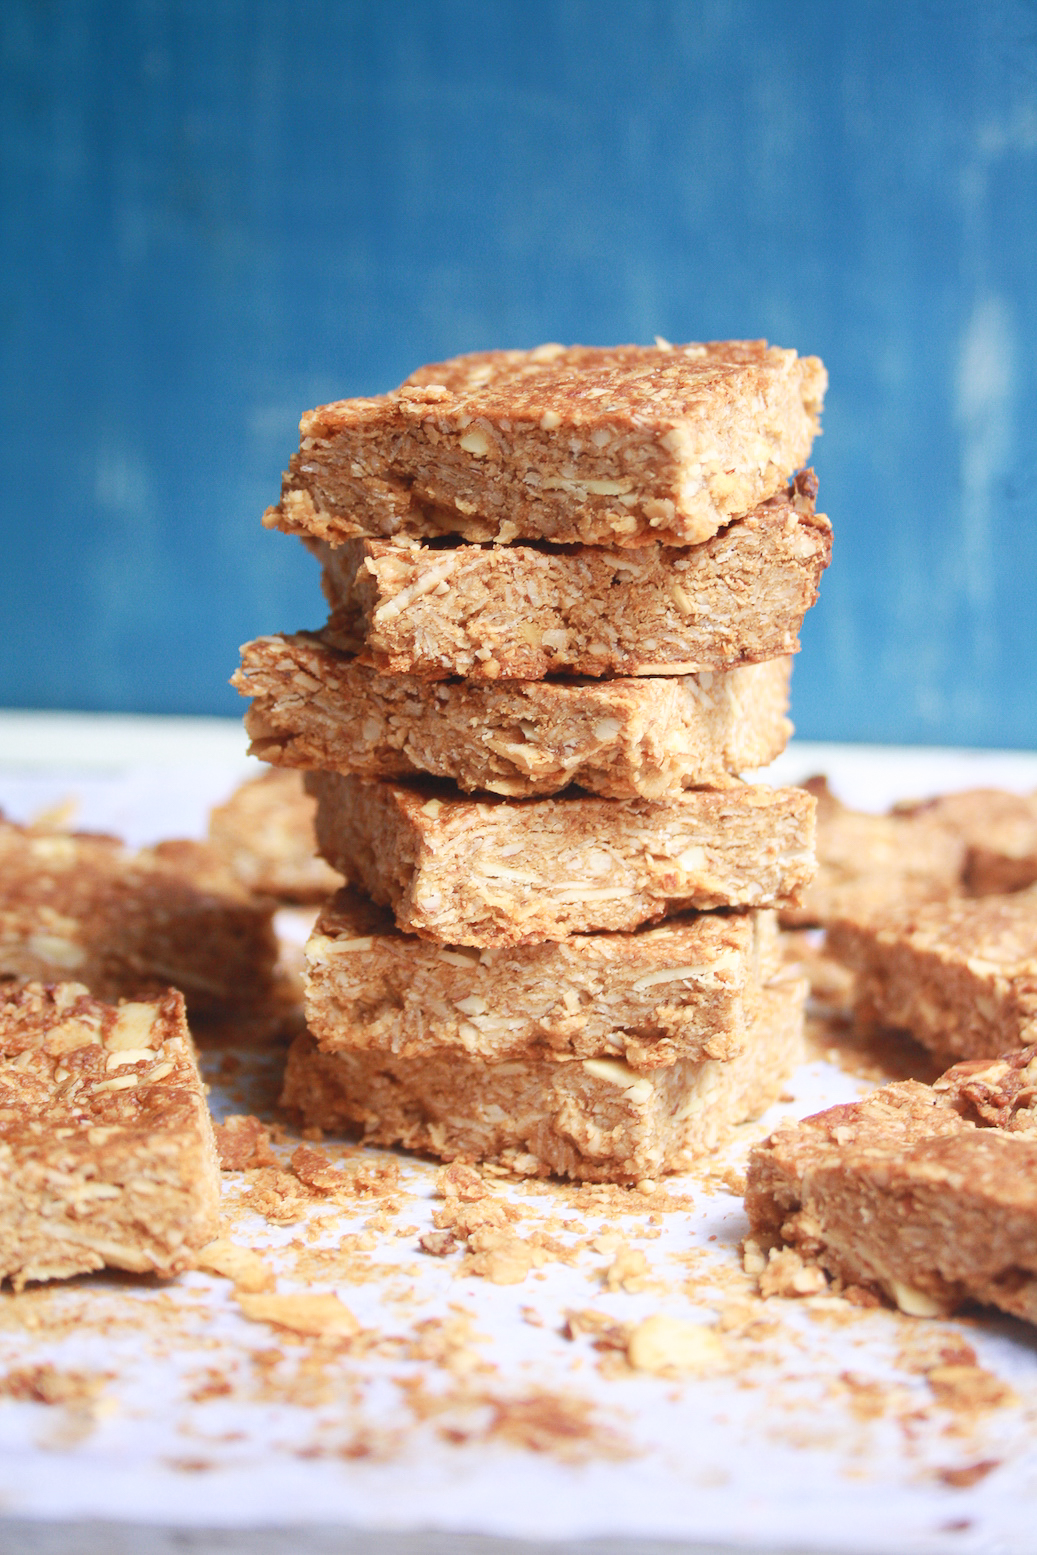 Chewy granola bars filled with oats, ground almonds, peanut butter. No fat or refined sugar!